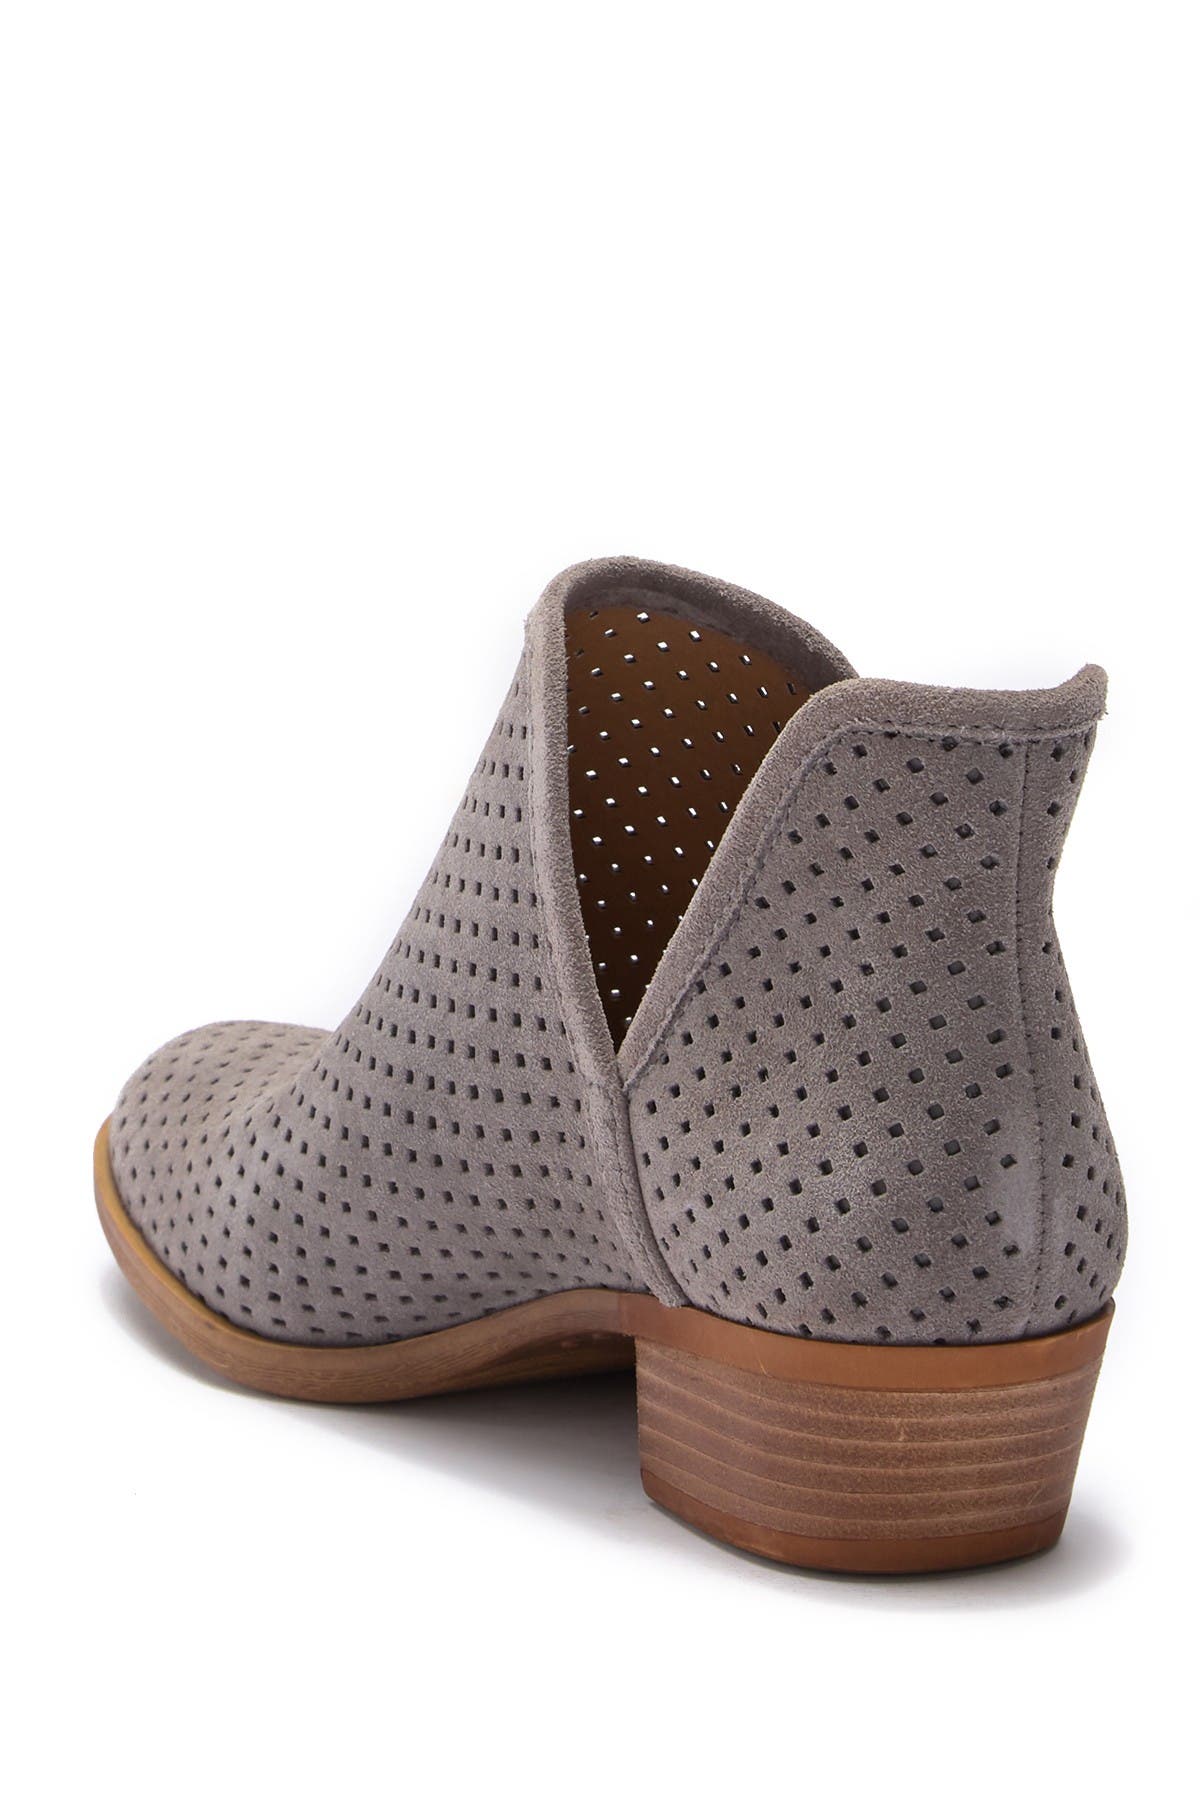 lucky brand perforated suede booties